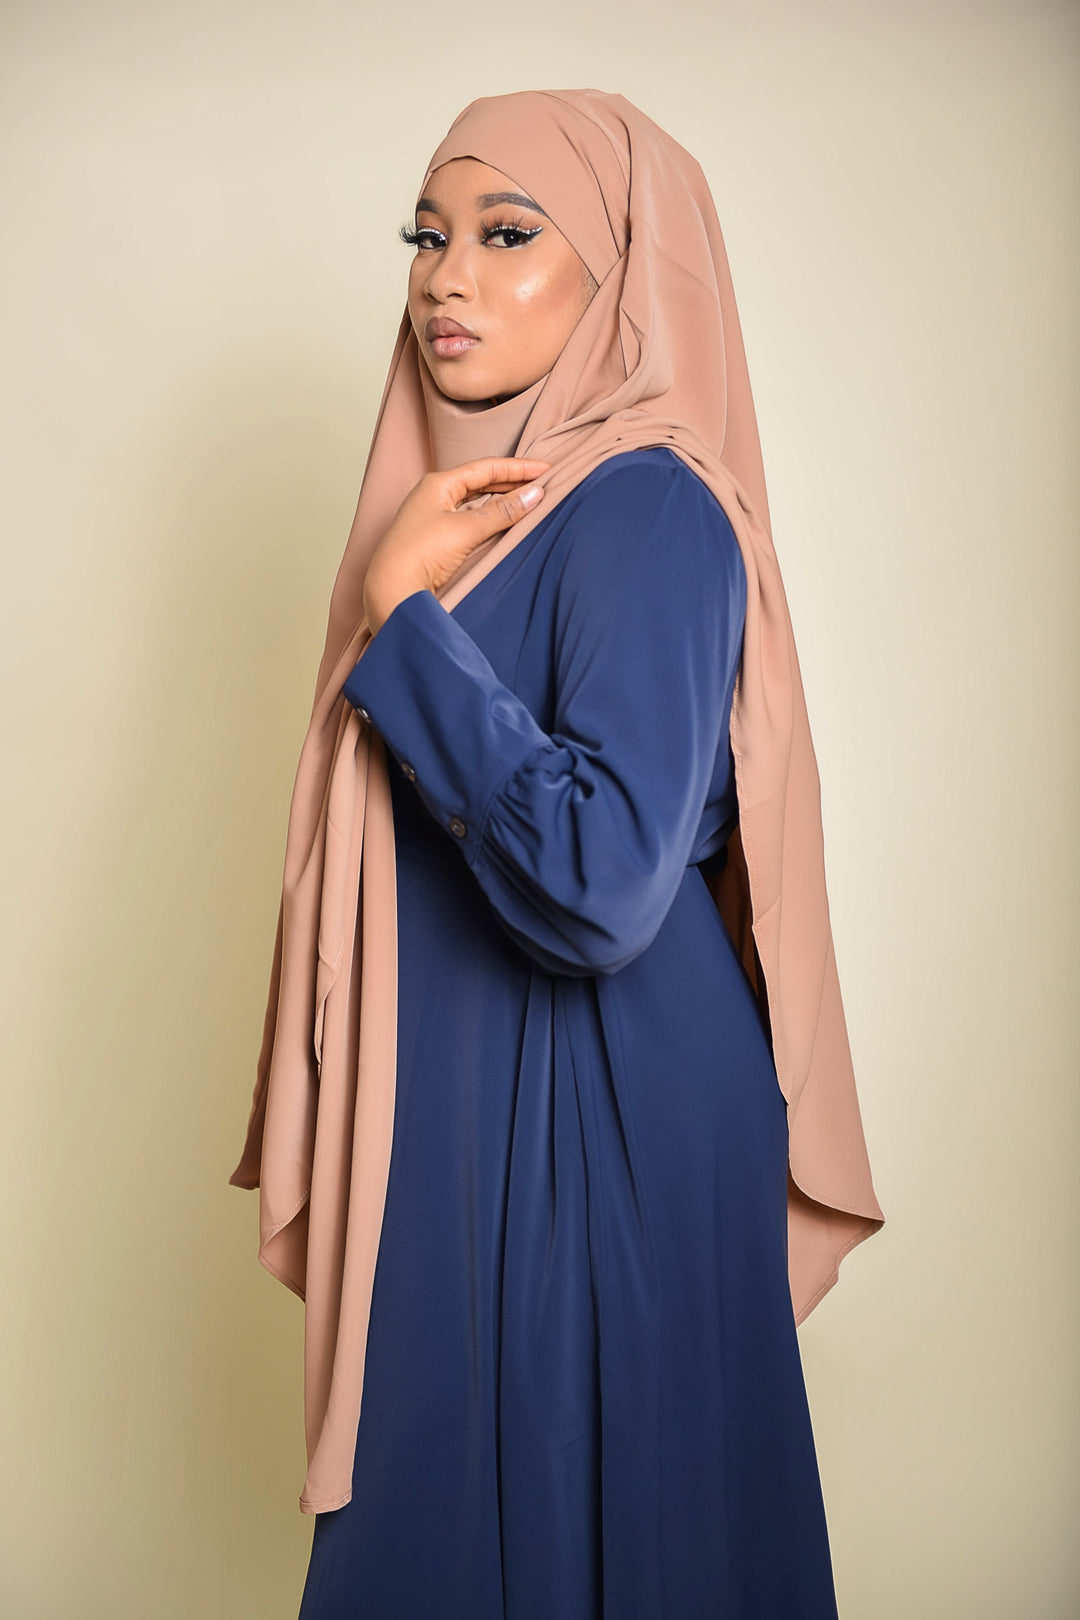 Get trendy with Diamond Khimar Beige - Hijab available at Voilee NY. Grab yours for $34.99 today!